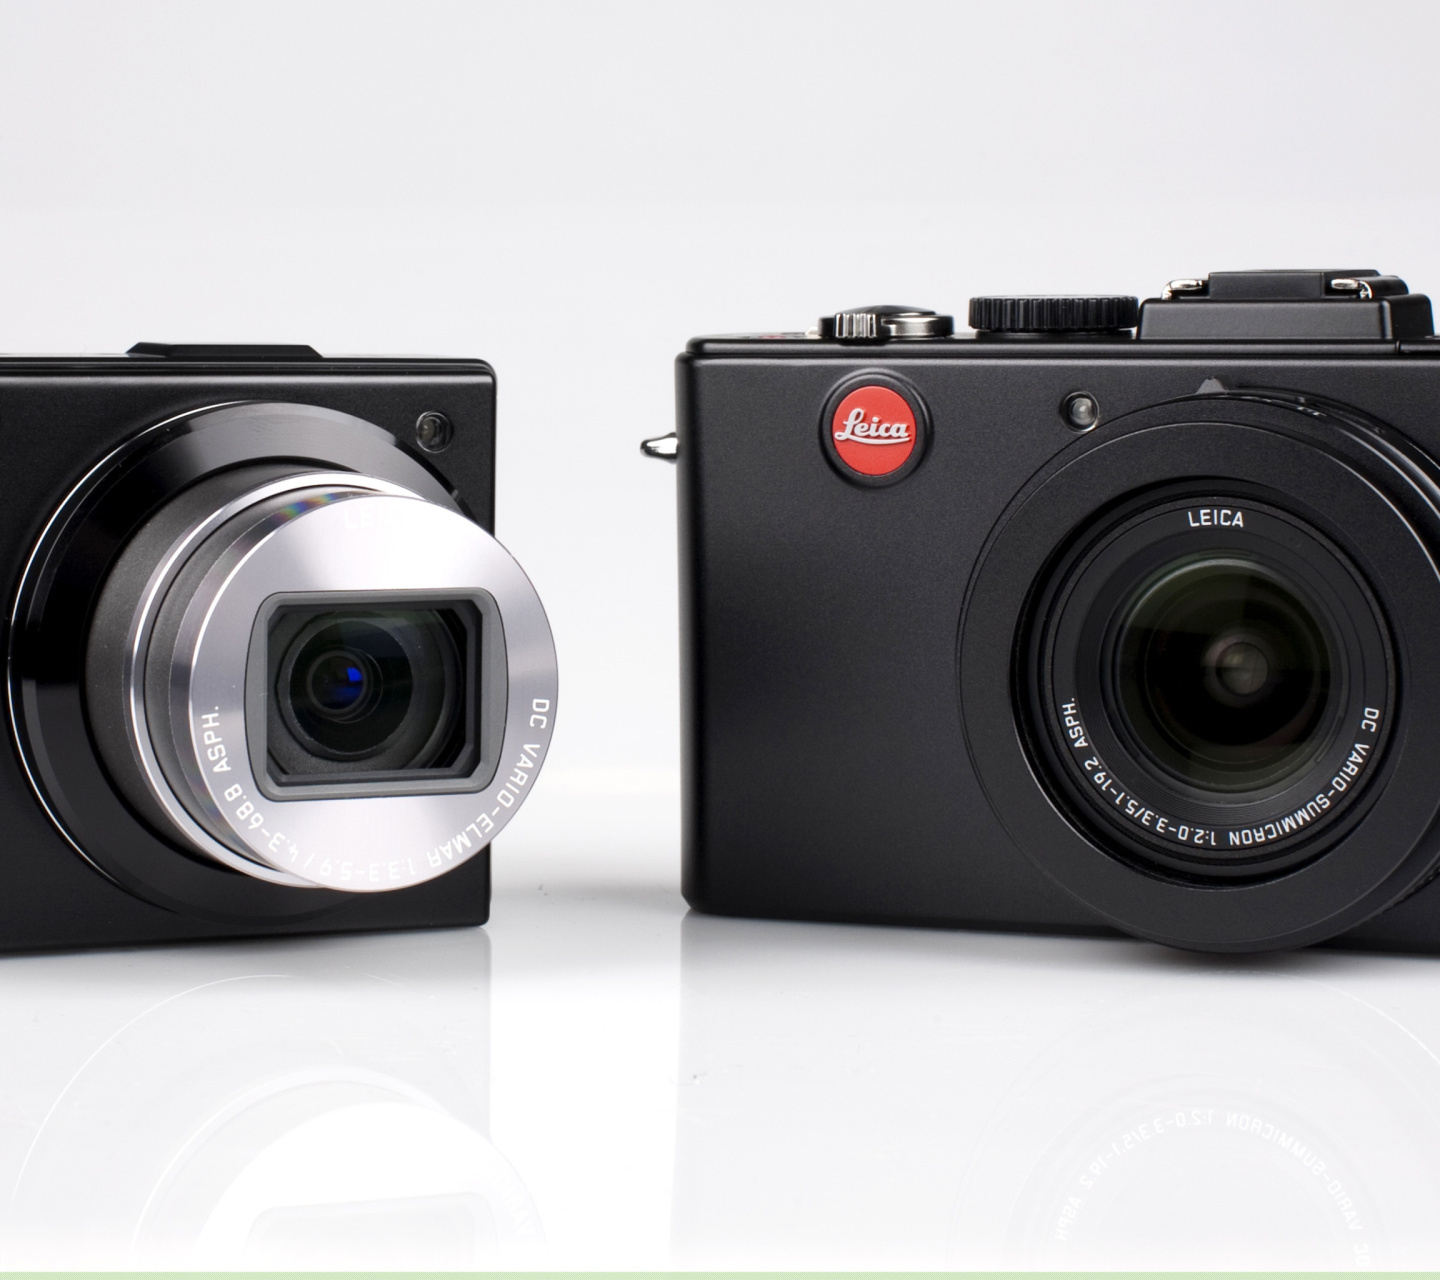 Leica D Lux 5 and Leica V LUX 1 wallpaper 1440x1280